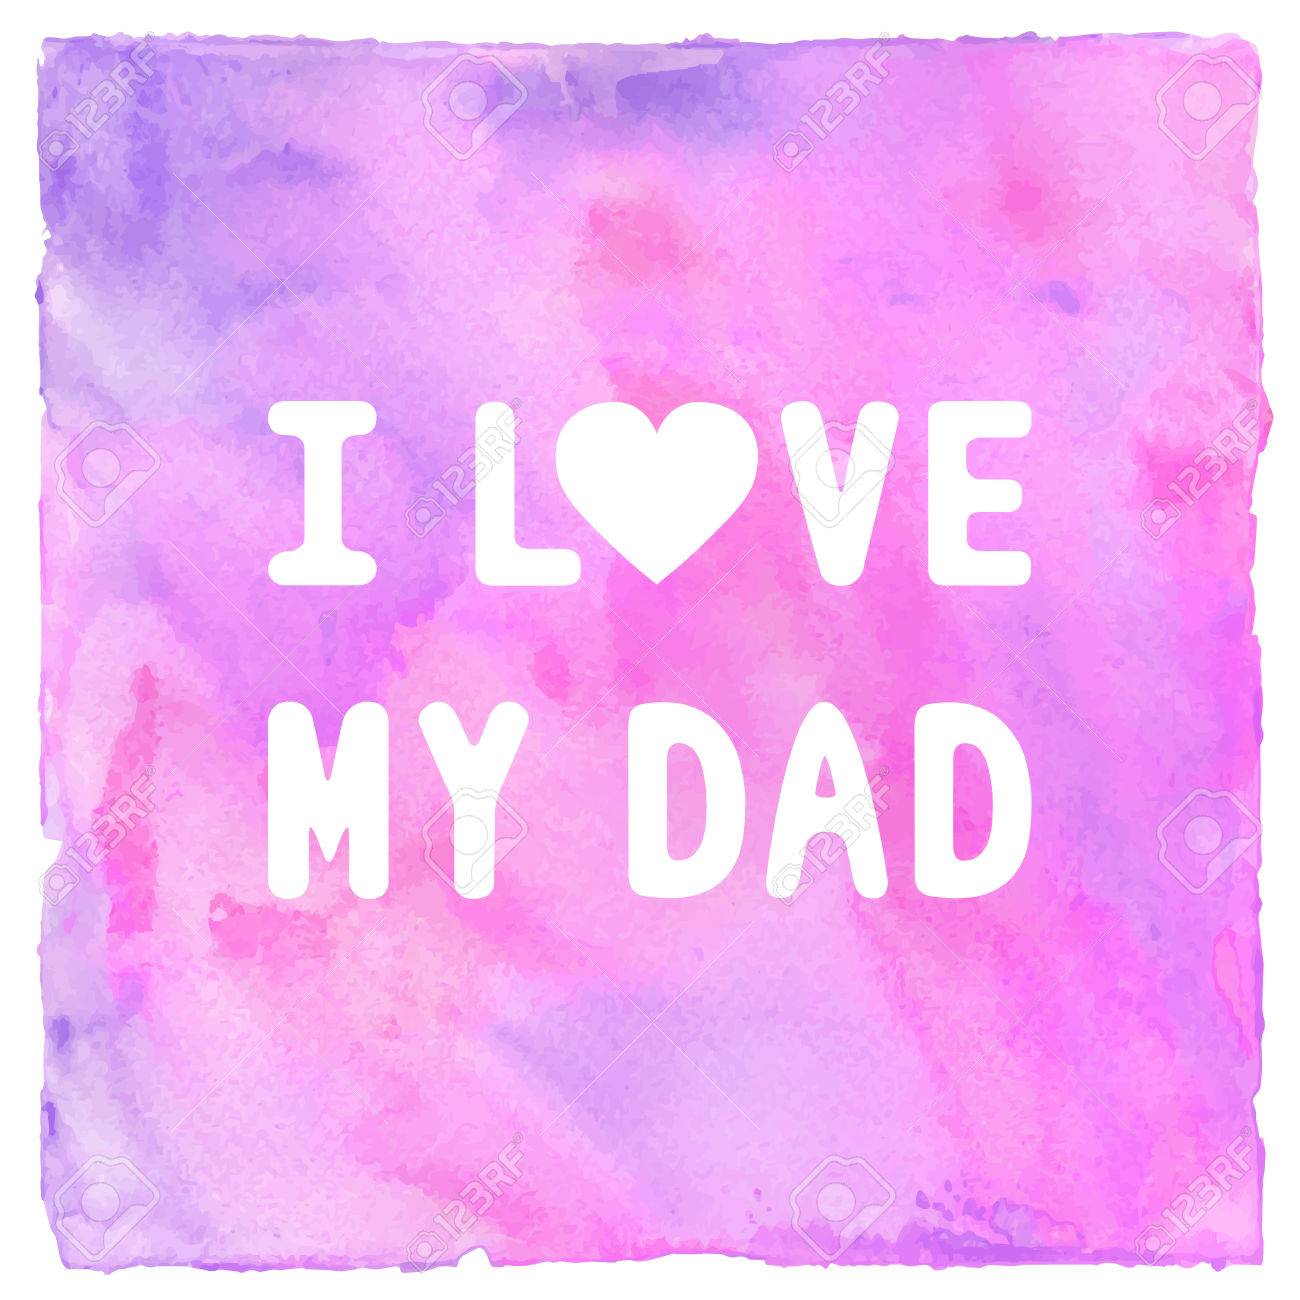 I Love My Dad On Violet And Pink Watercolor Background Stock